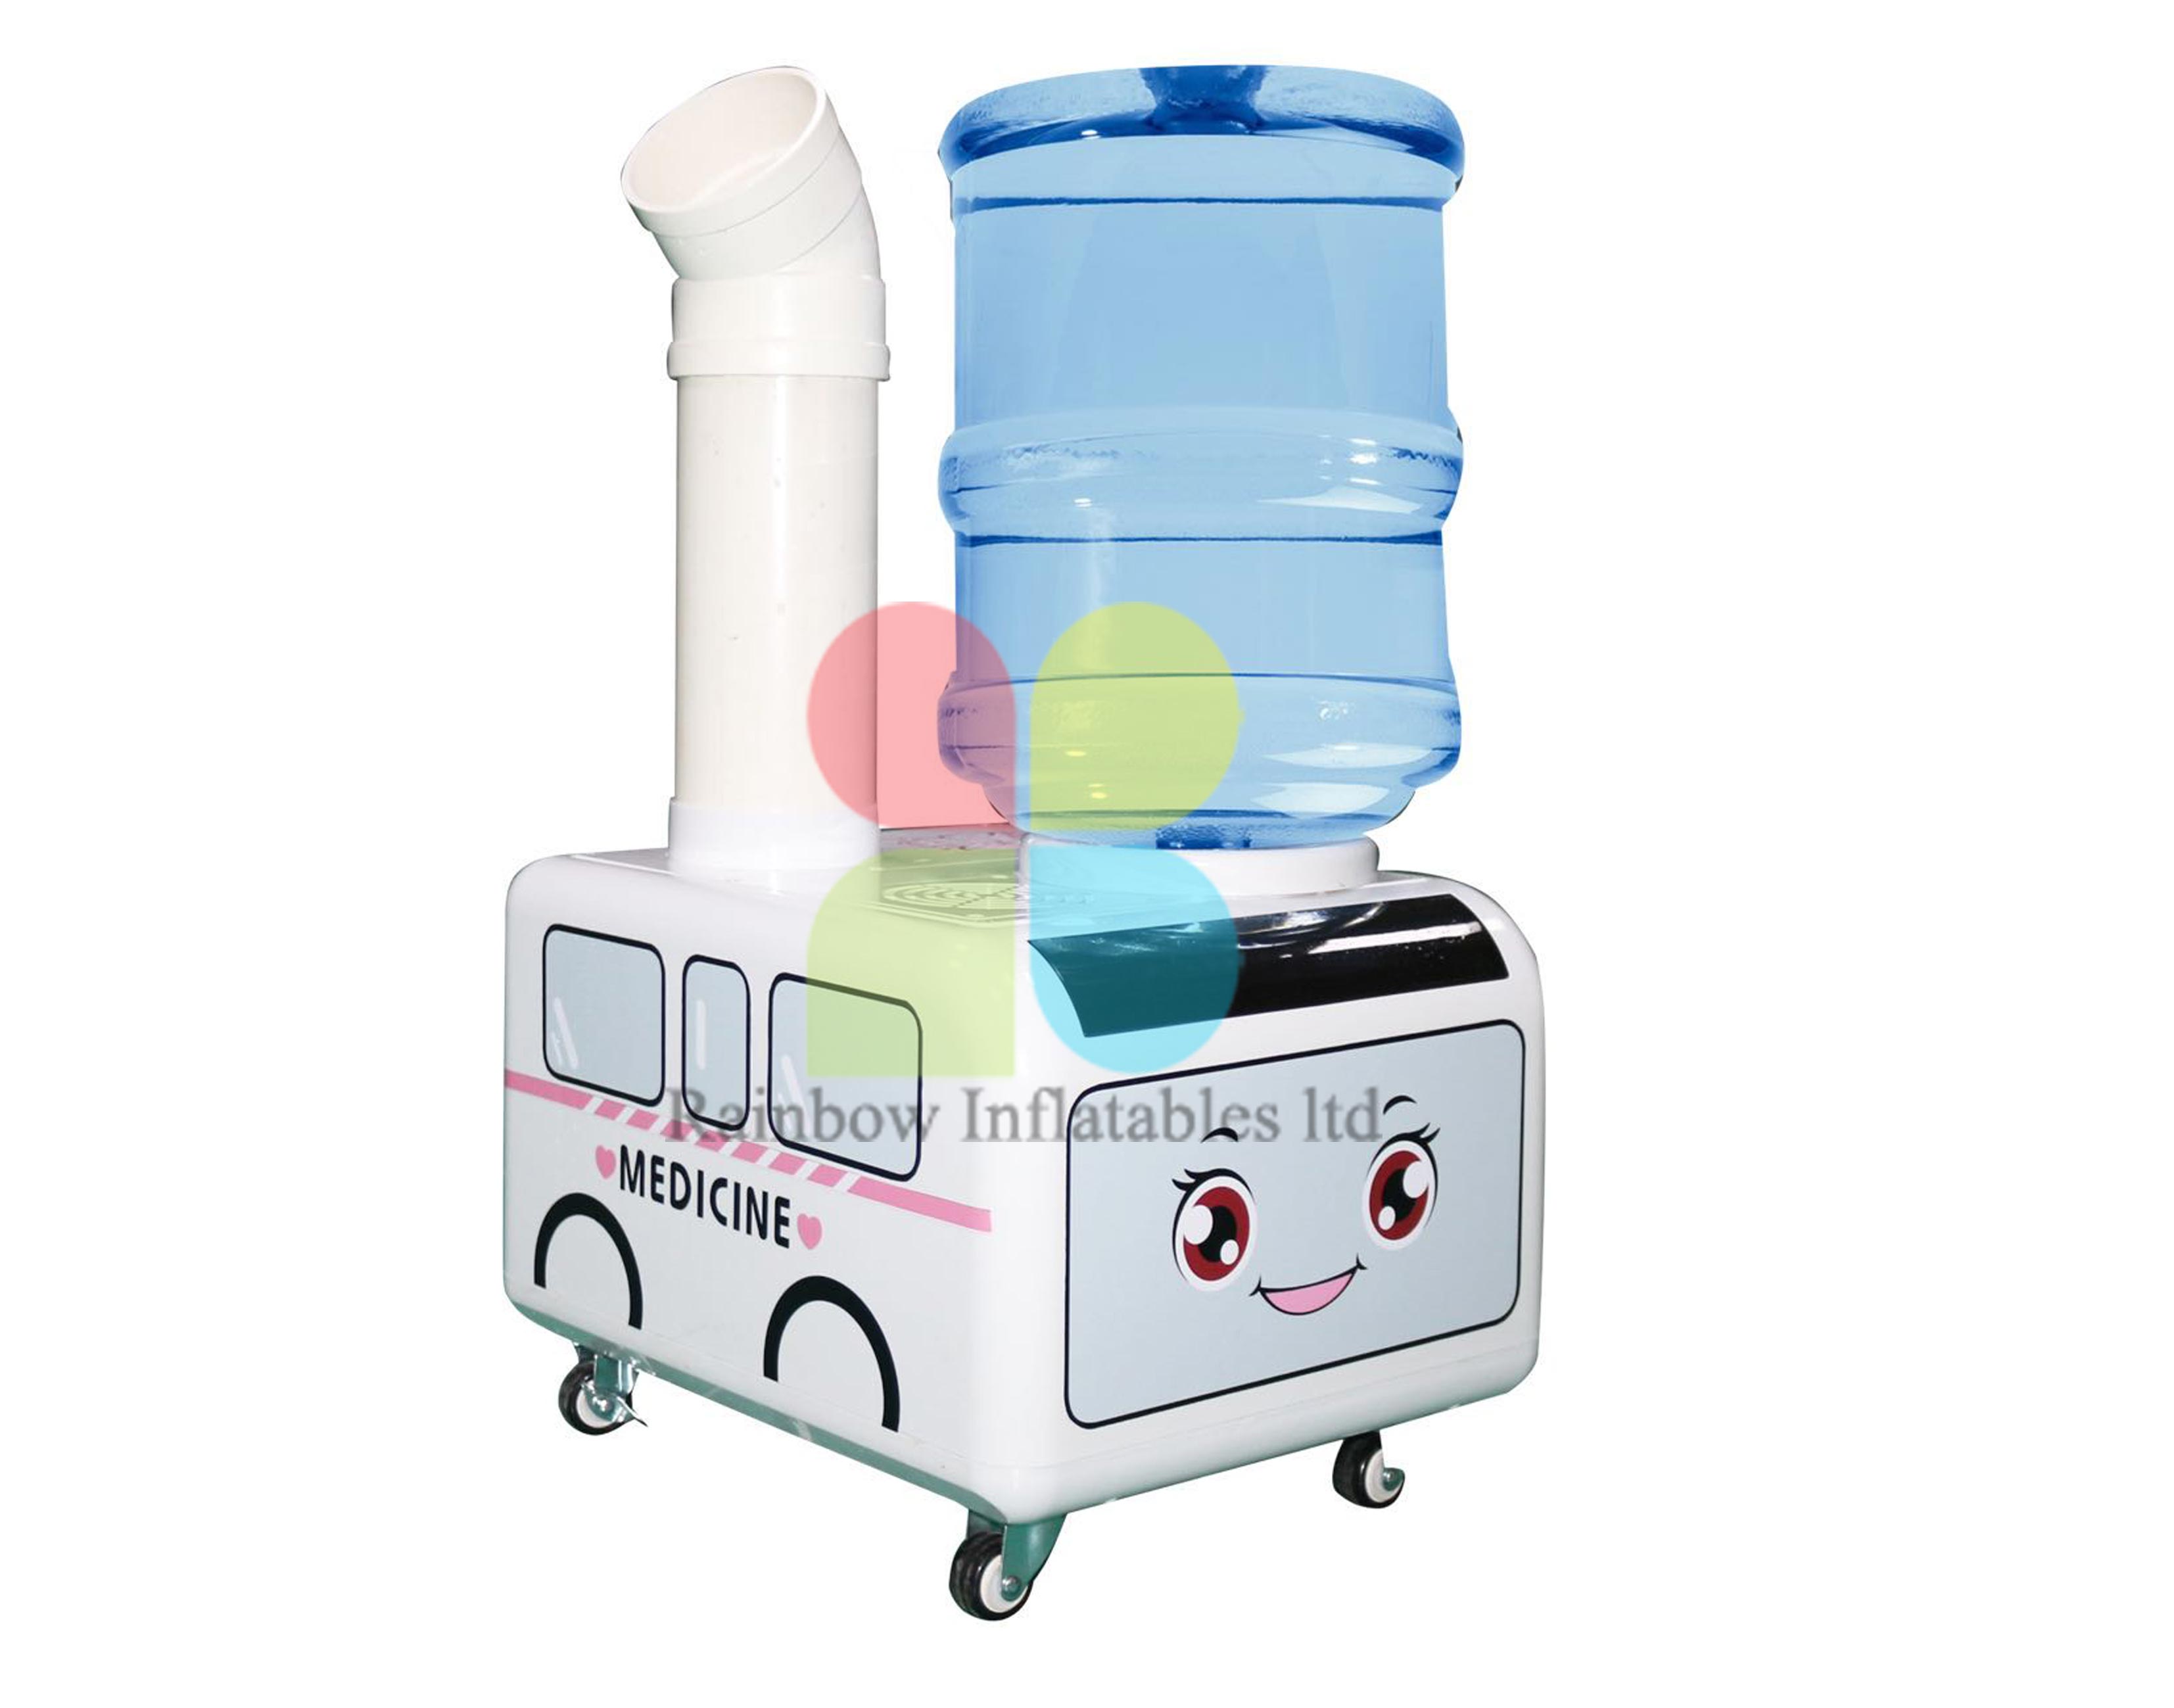 Widely Used Facility Virus Disinfection Sterilizing Machine Apparatus